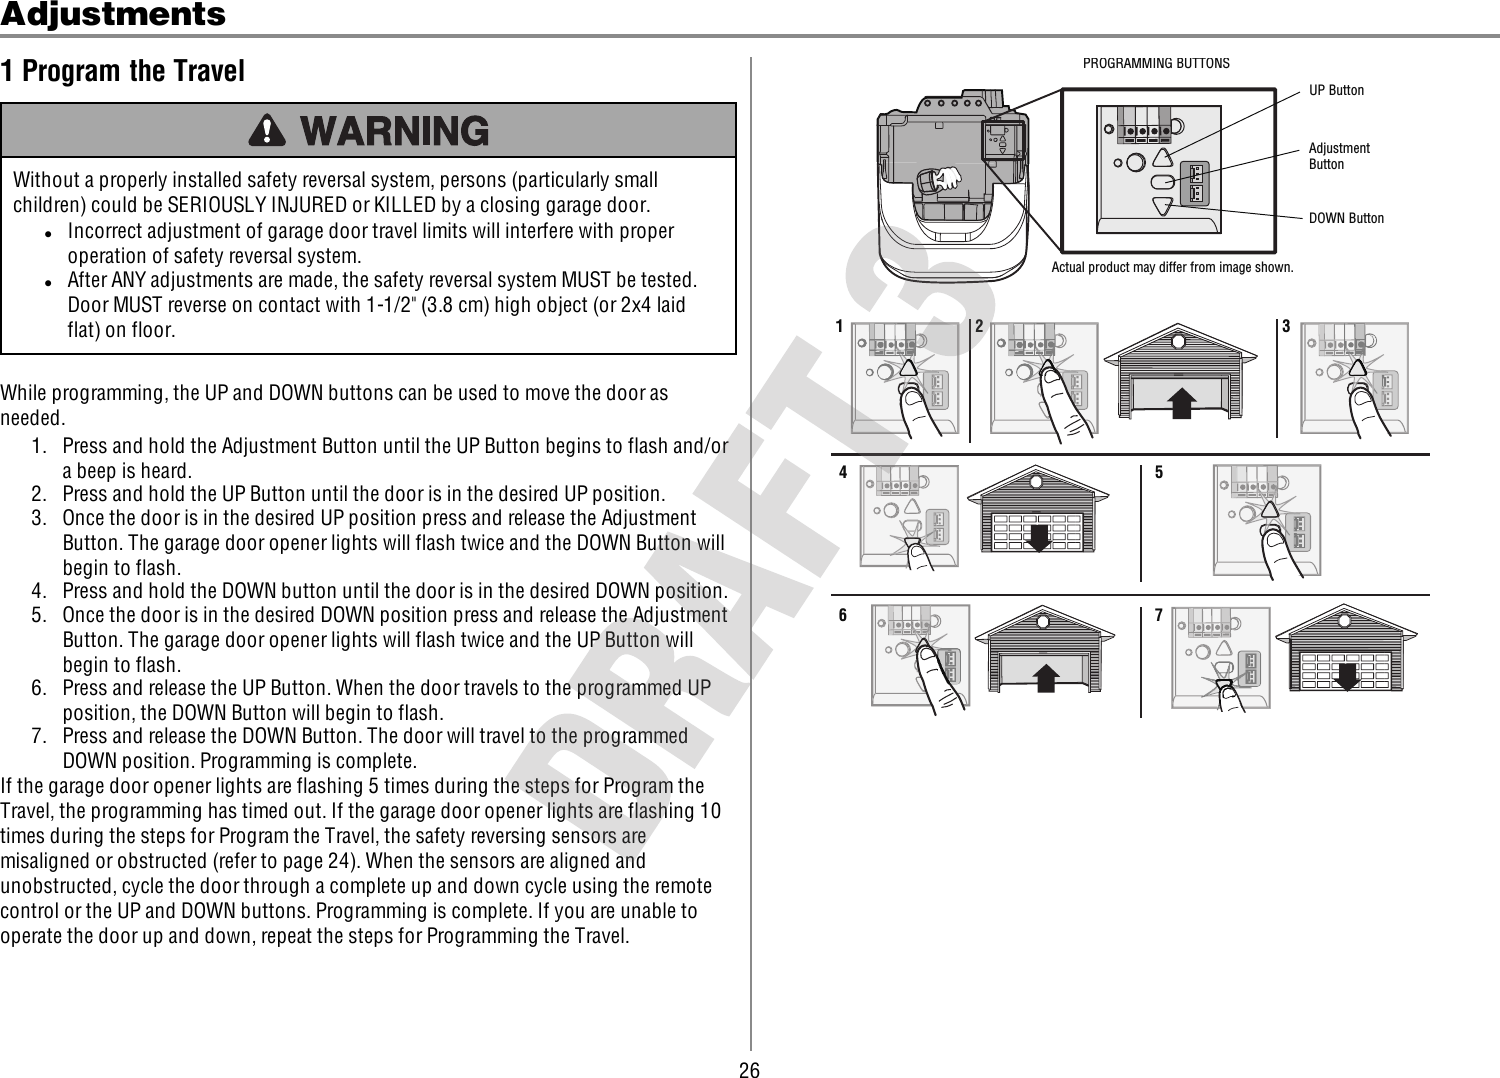 26Adjustments1 Program the TravelWithout a properly installed safety reversal system, persons (particularly smallchildren) could be SERIOUSLY INJURED or KILLED by a closing garage door.lIncorrect adjustment of garage door travel limits will interfere with properoperation of safety reversal system.lAfter ANY adjustments are made, the safety reversal system MUST be tested.Door MUST reverse on contact with 1-1/2&quot; (3.8 cm) high object (or 2x4 laidflat) on floor.While programming, the UP and DOWN buttons can be used to move the door asneeded.1. Press and hold the Adjustment Button until the UP Button begins to flash and/ora beep is heard.2. Press and hold the UP Button until the door is in the desired UP position.3. Once the door is in the desired UP position press and release the AdjustmentButton. The garage door opener lights will flash twice and the DOWN Button willbegin to flash.4. Press and hold the DOWN button until the door is in the desired DOWN position.5. Once the door is in the desired DOWN position press and release the AdjustmentButton. The garage door opener lights will flash twice and the UP Button willbegin to flash.6. Press and release the UP Button. When the door travels to the programmed UPposition, the DOWN Button will begin to flash.7. Press and release the DOWN Button. The door will travel to the programmedDOWN position. Programming is complete.If the garage door opener lights are flashing 5 times during the steps for Program theTravel, the programming has timed out. If the garage door opener lights are flashing 10times during the steps for Program the Travel, the safety reversing sensors aremisaligned or obstructed (refer to page 24). When the sensors are aligned andunobstructed, cycle the door through a complete up and down cycle using the remotecontrol or the UP and DOWN buttons. Programming is complete. If you are unable tooperate the door up and down, repeat the steps for Programming the Travel.UP ButtonAdjustment ButtonDOWN ButtonActual product may differ from image shown.PROGRAMMING BUTTONS1 2 3456 7